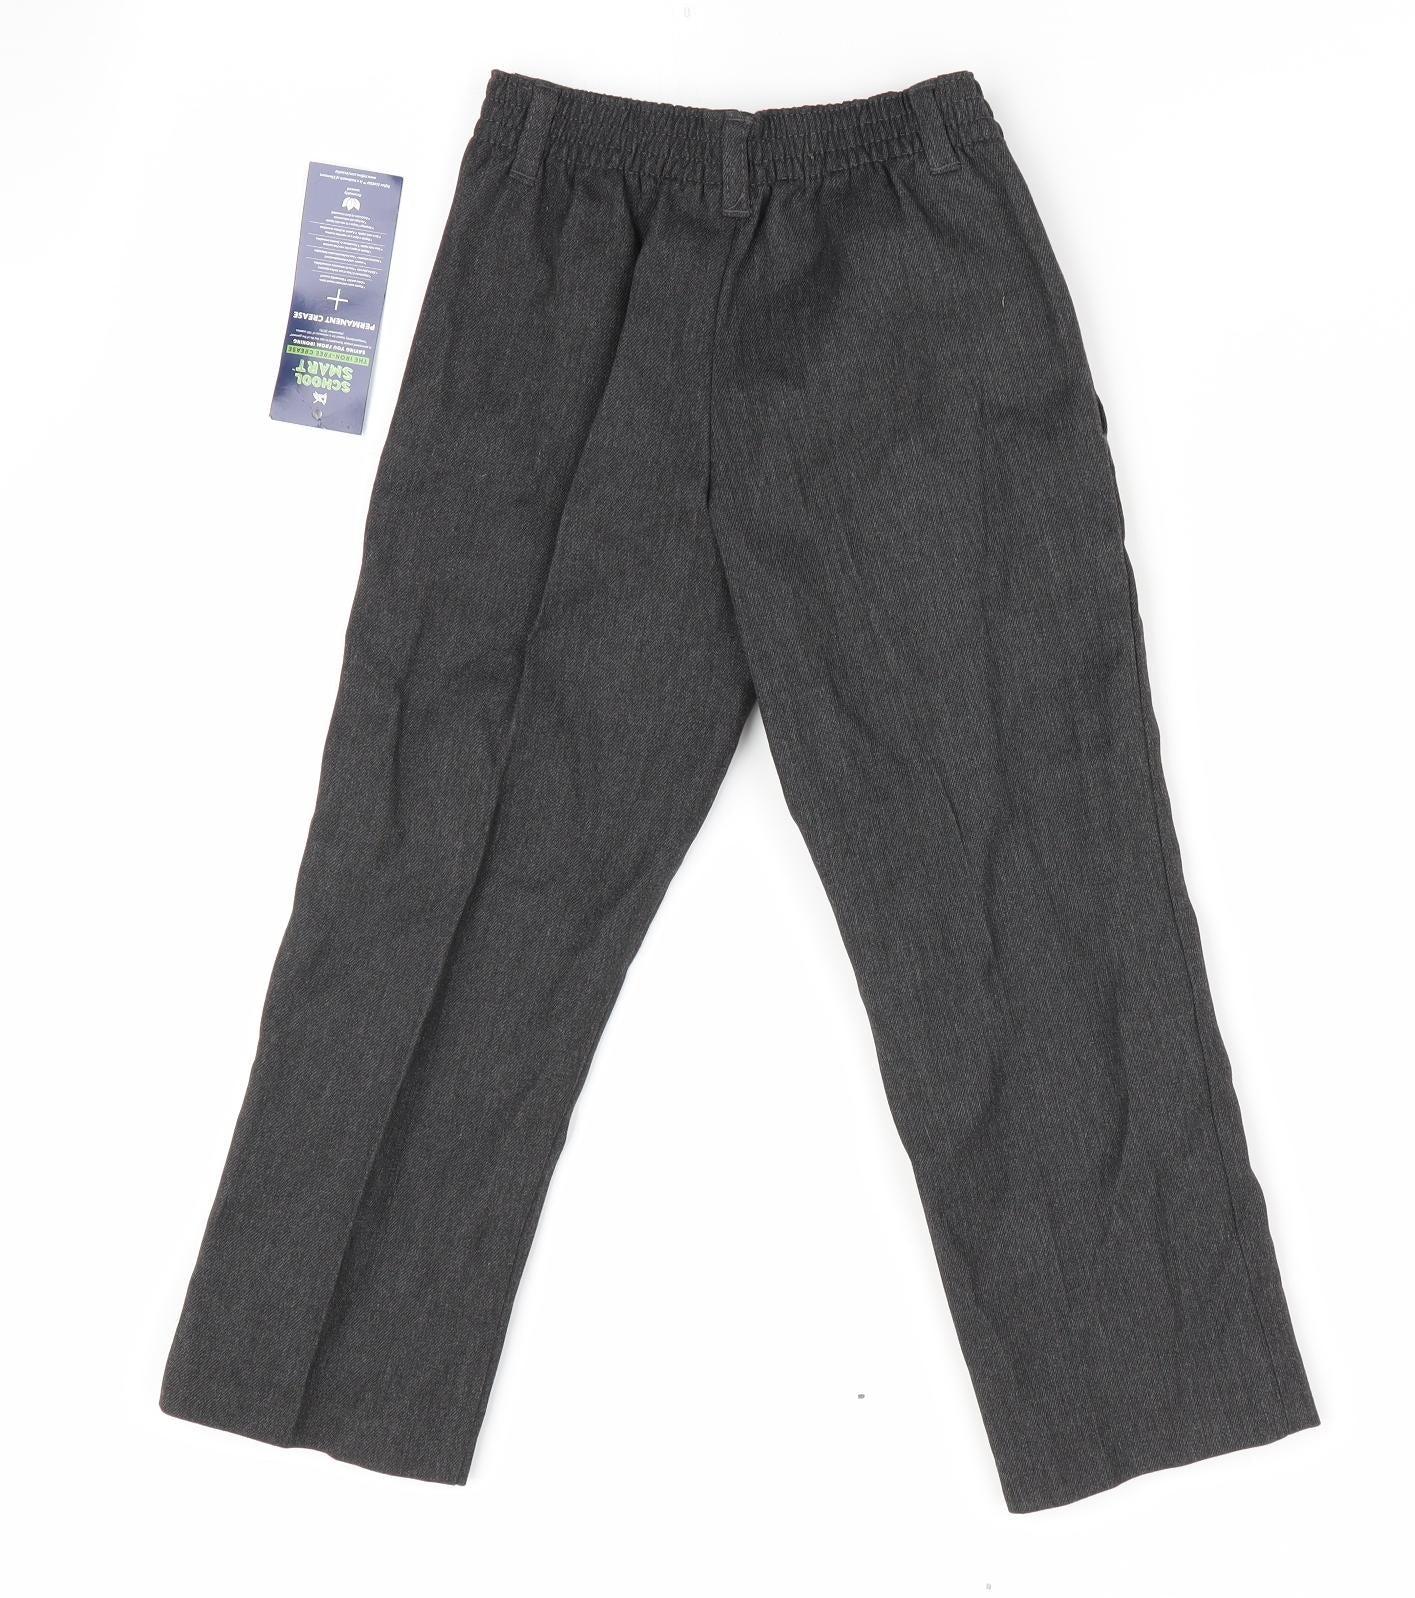 George Boys Grey  Polyester Dress Pants Trousers Size 3-4 Years  Regular  - Back Elastication